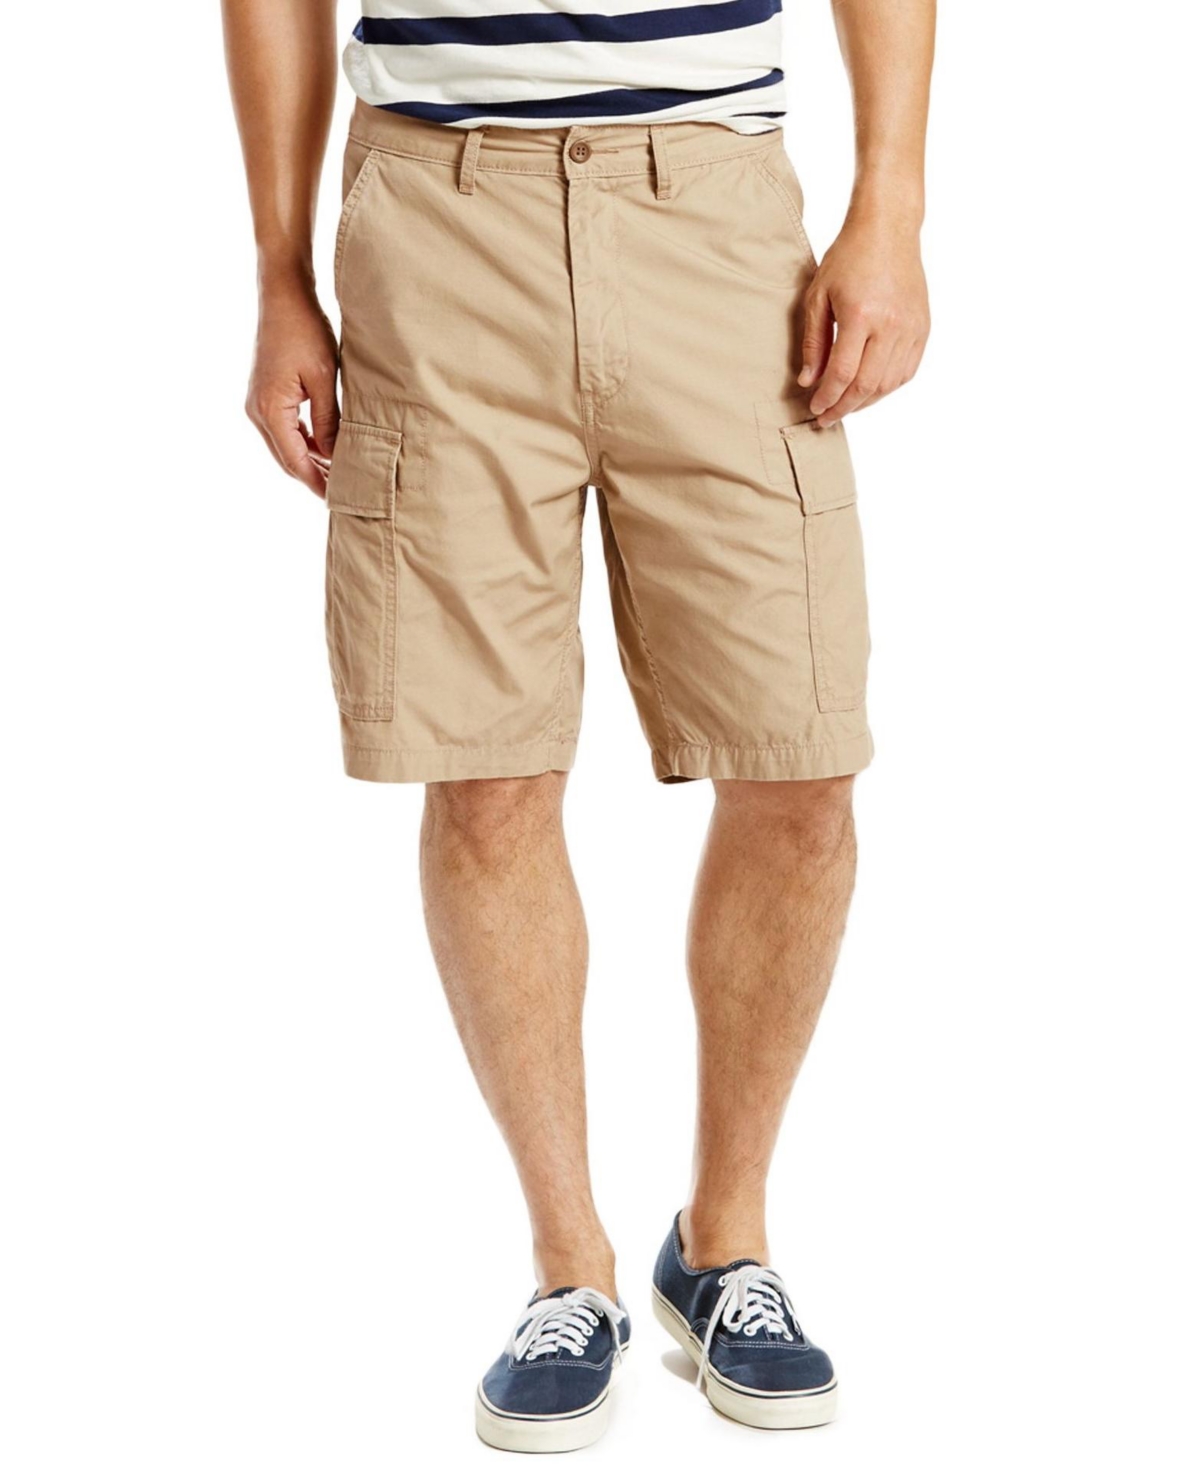 UPC 193239697322 product image for Levi's Men's Big and Tall Loose Fit Carrier Cargo Shorts | upcitemdb.com